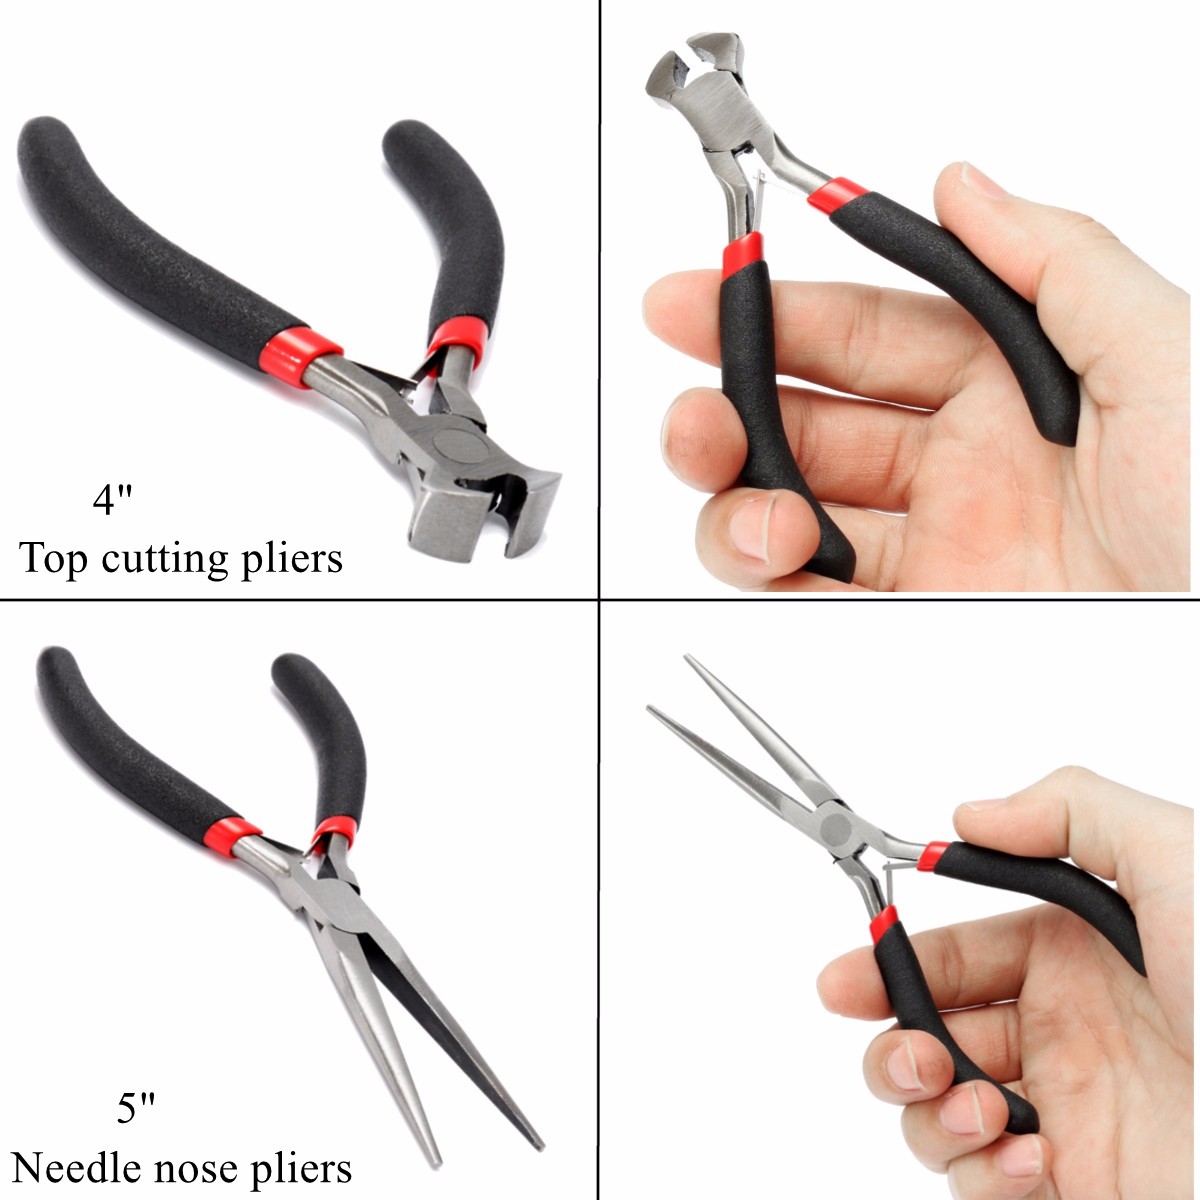 Jewellery-Mini-Pliers-Cutter-Round-Bent-Nose-Beading-Making-Craft-Tool-Kit-1143377